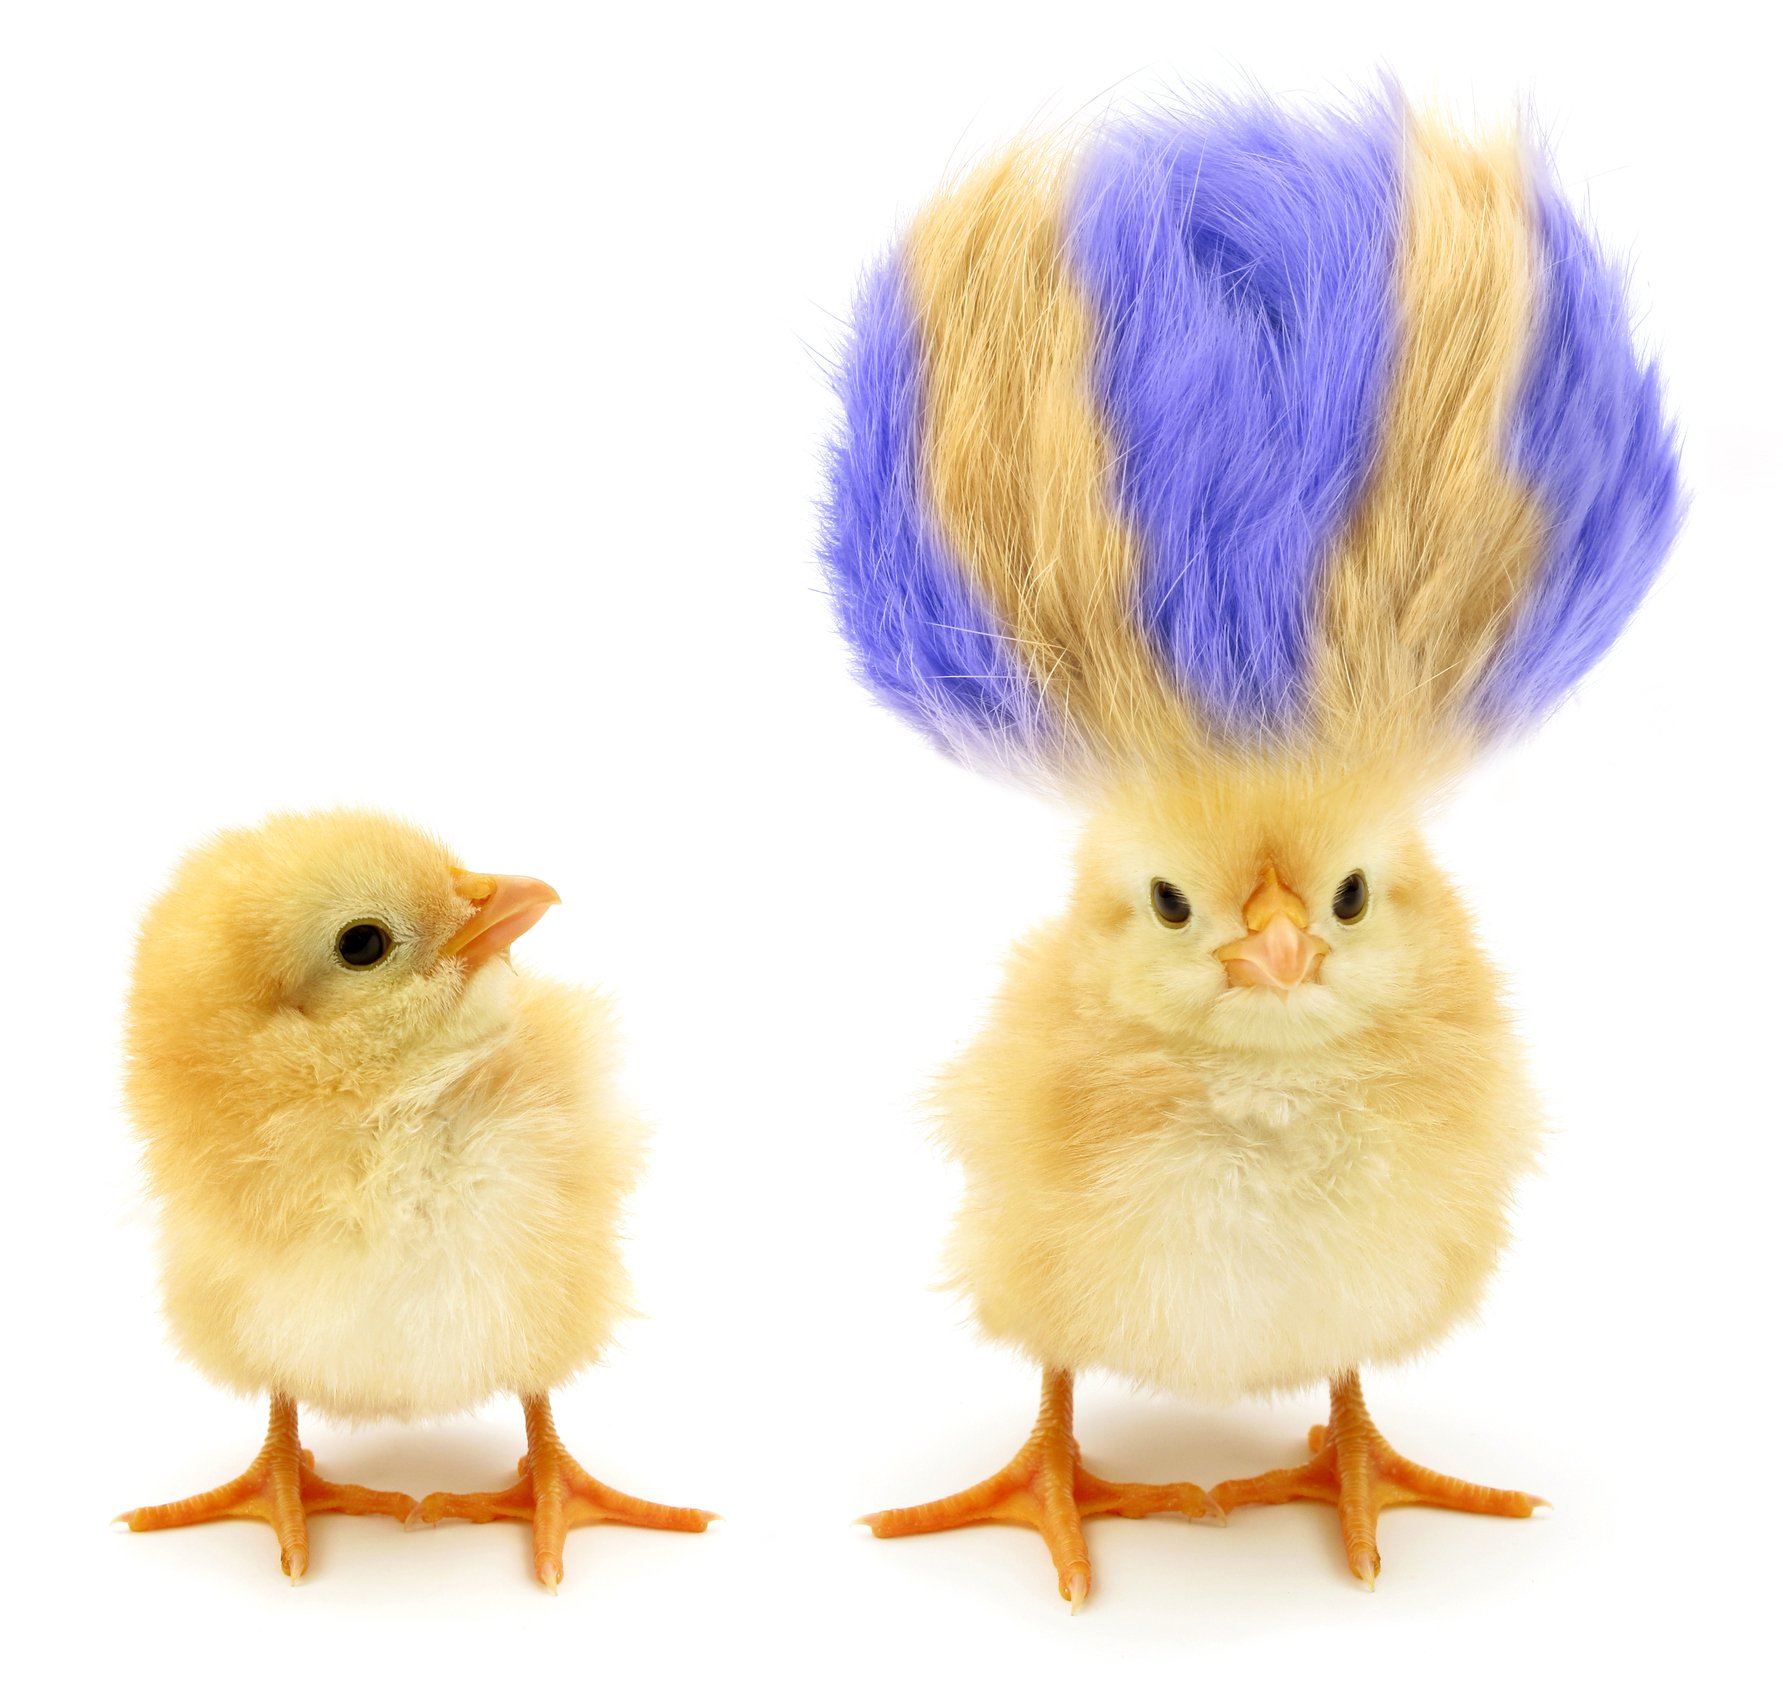 A couple of chicks one has a purple and yellow afro